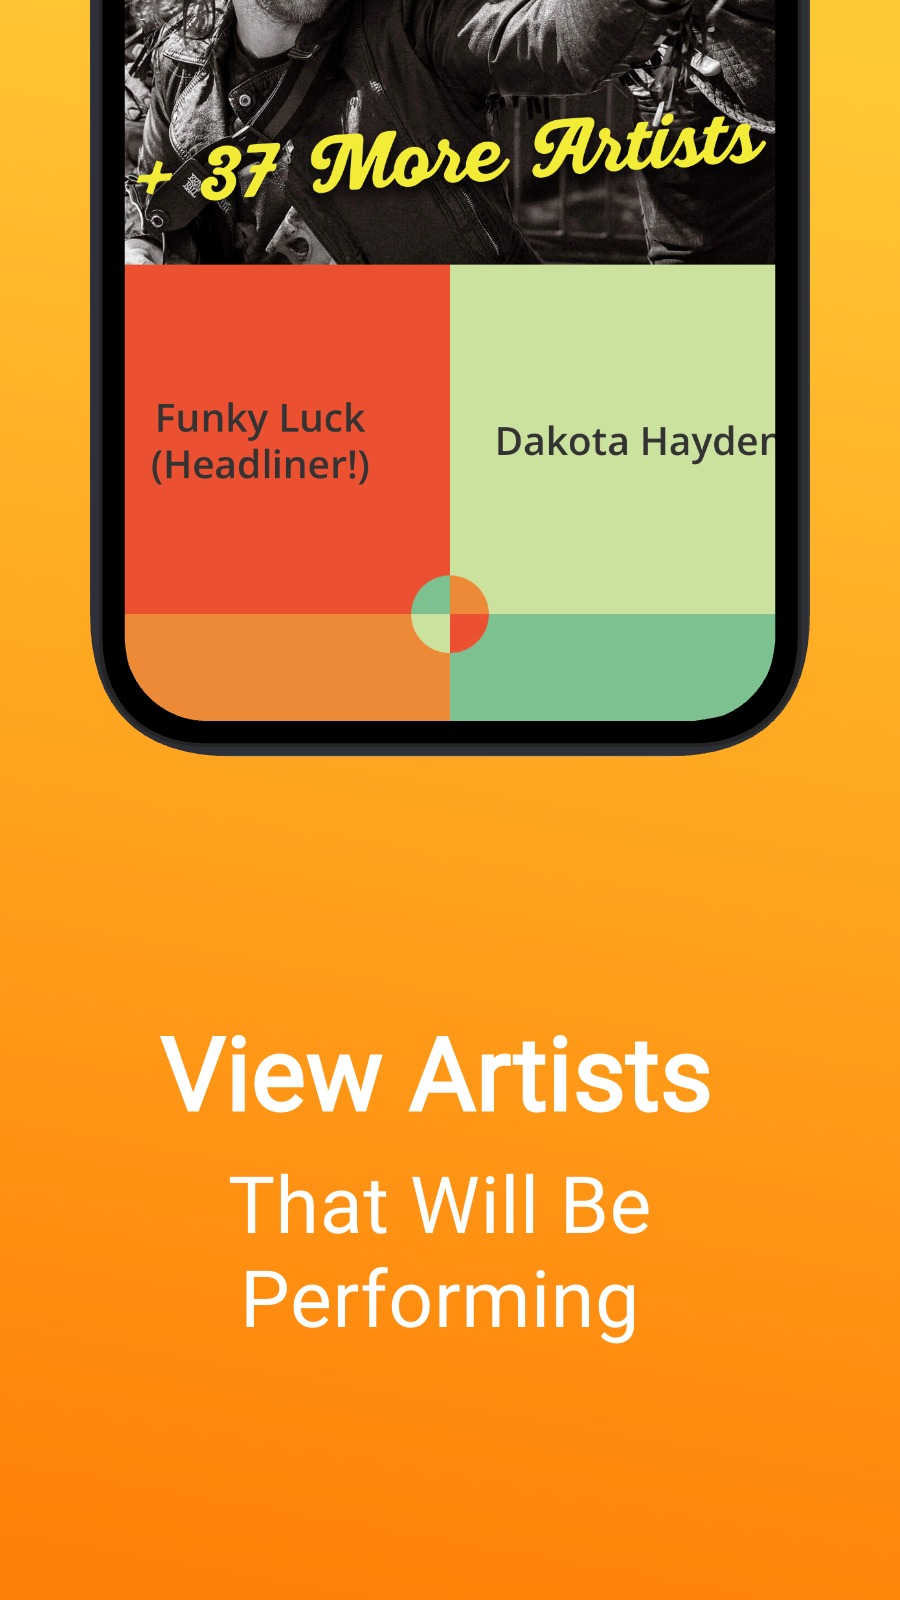 View Artists - That Will Be Performing